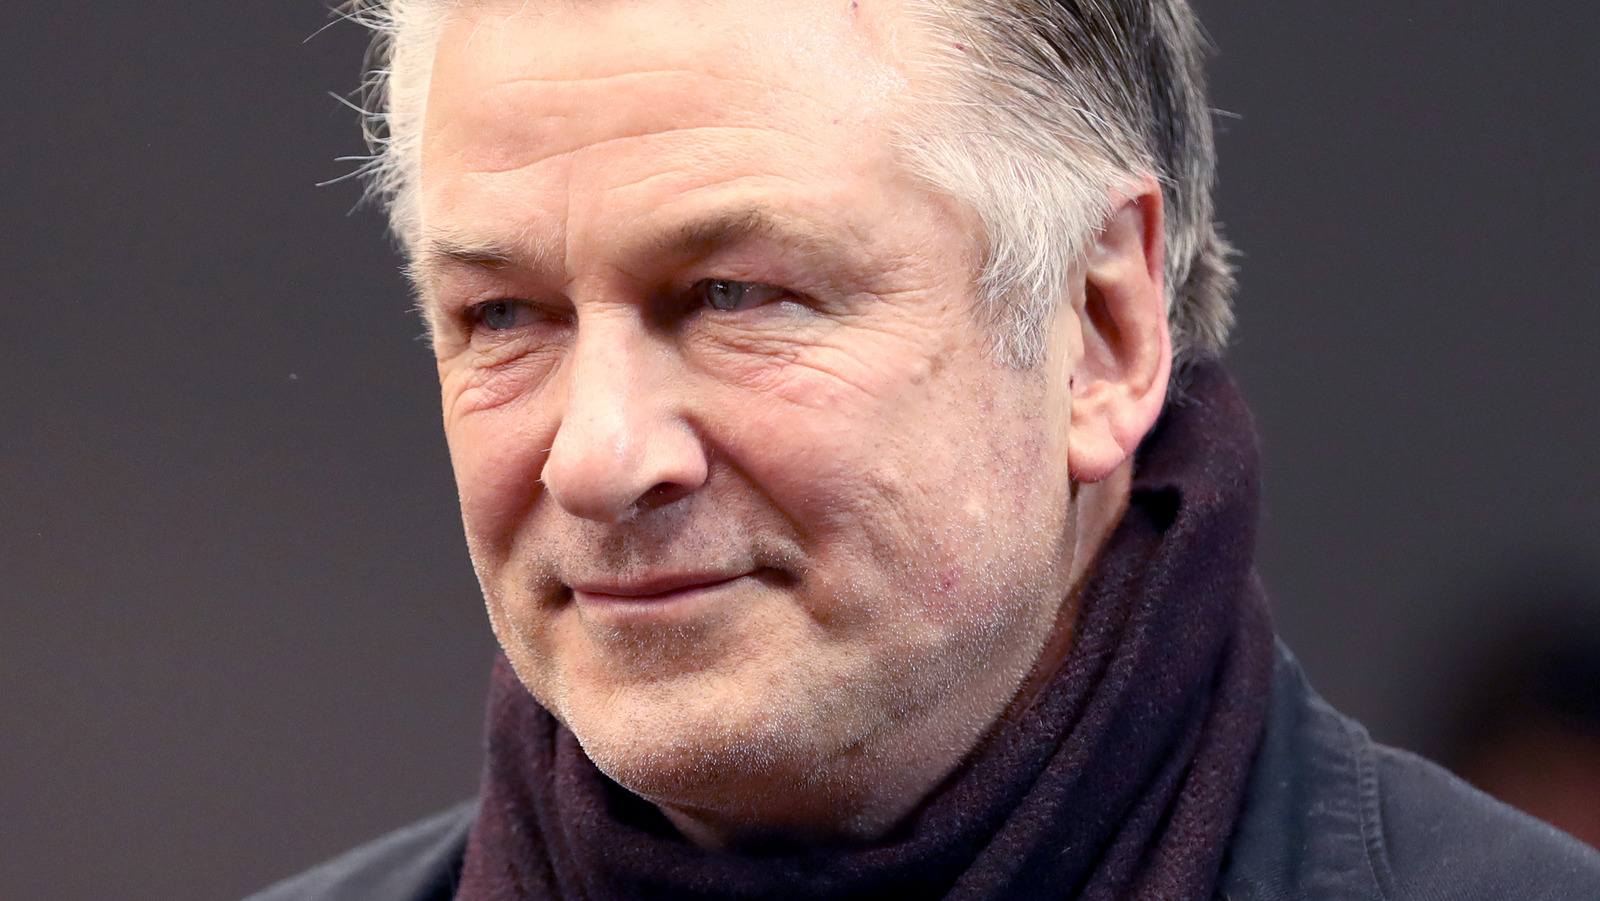 Lawyer Warns Potential Criminal Case Against Alec Baldwin Might Not Come Easy – Exclusive